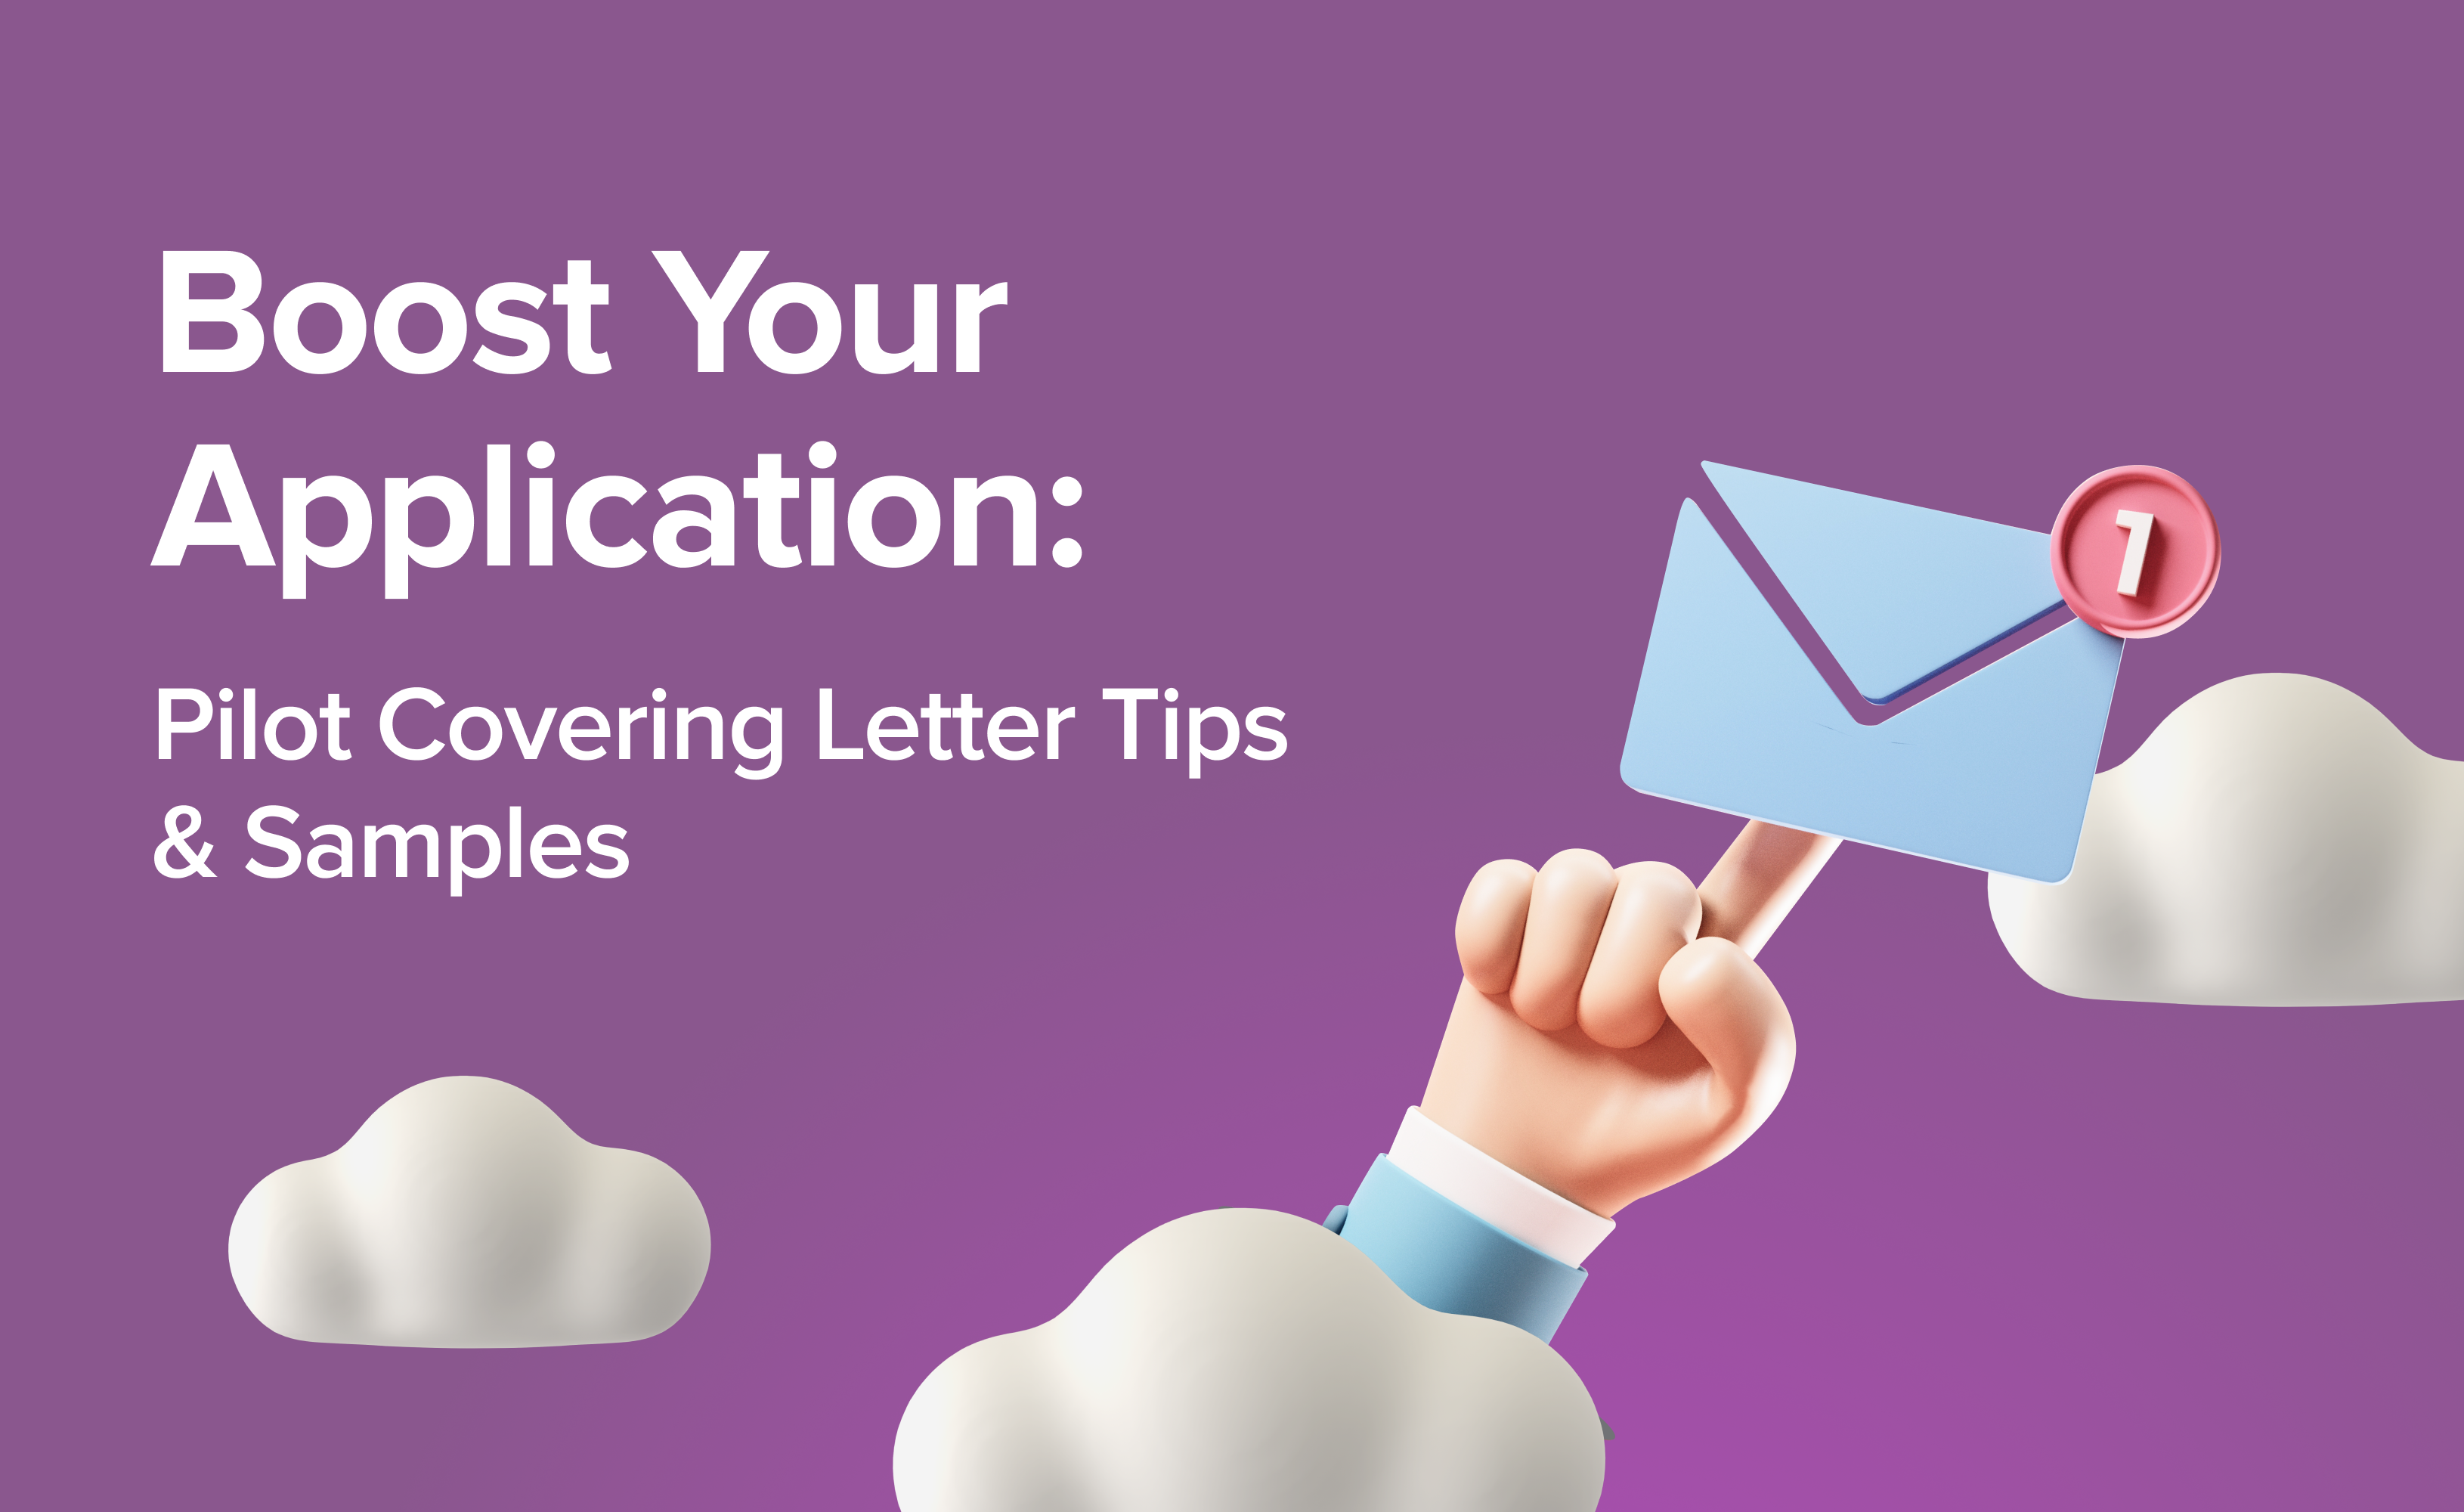 Boost Your Application: Pilot Covering Letter Tips and Samples